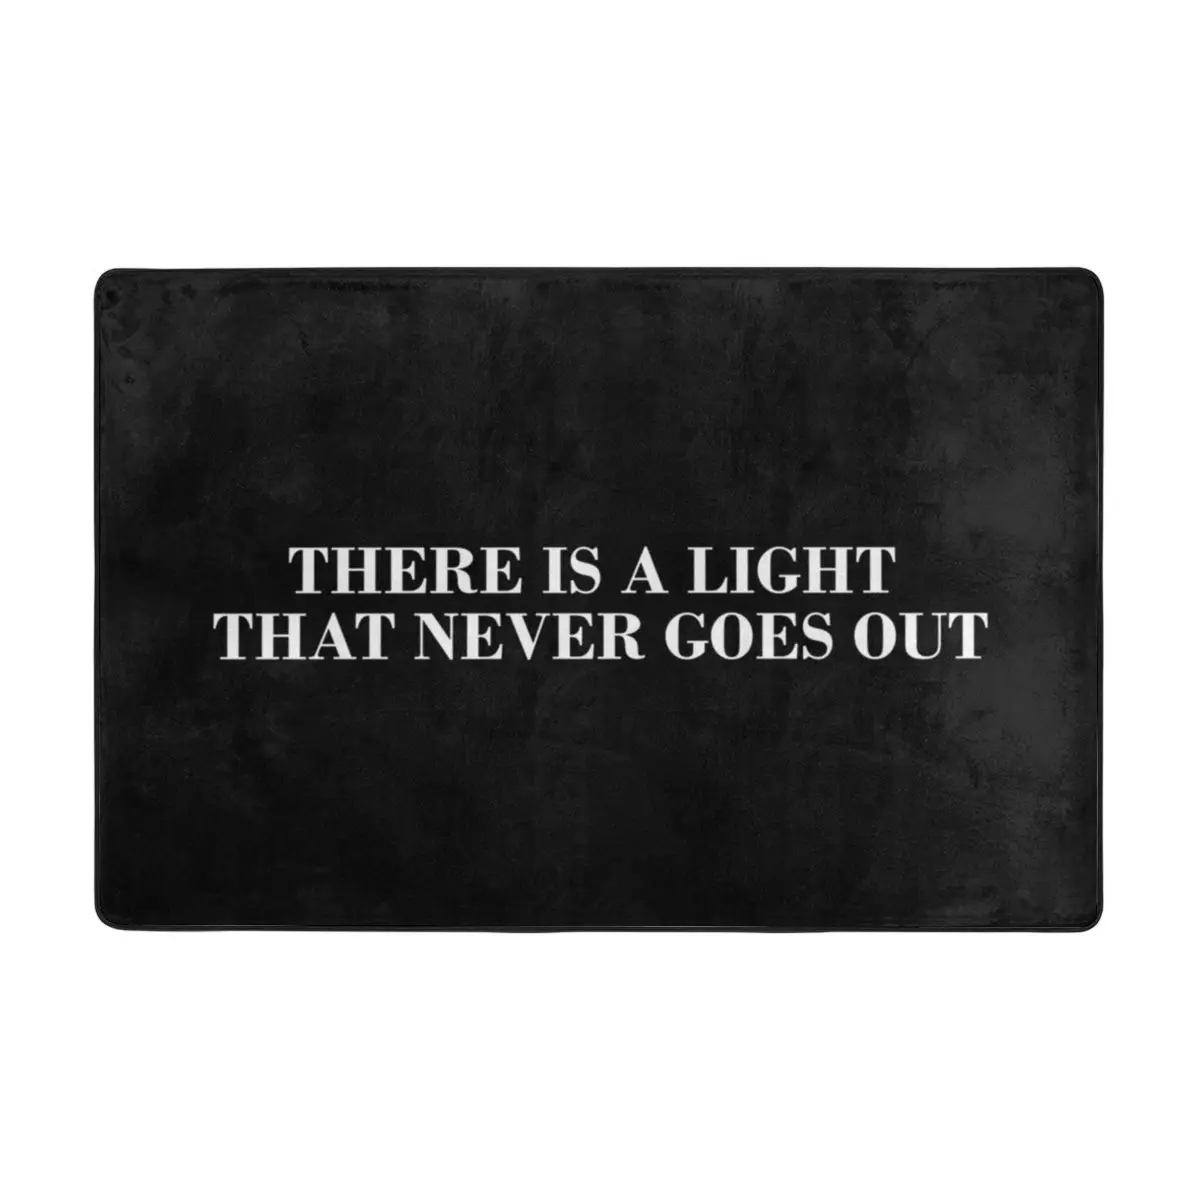 

There Is A Light That Never Goes Out Doormat Carpet Mat Rug Polyester Anti-slip Floor Decor Bath Bathroom Kitchen Balcony 60x90